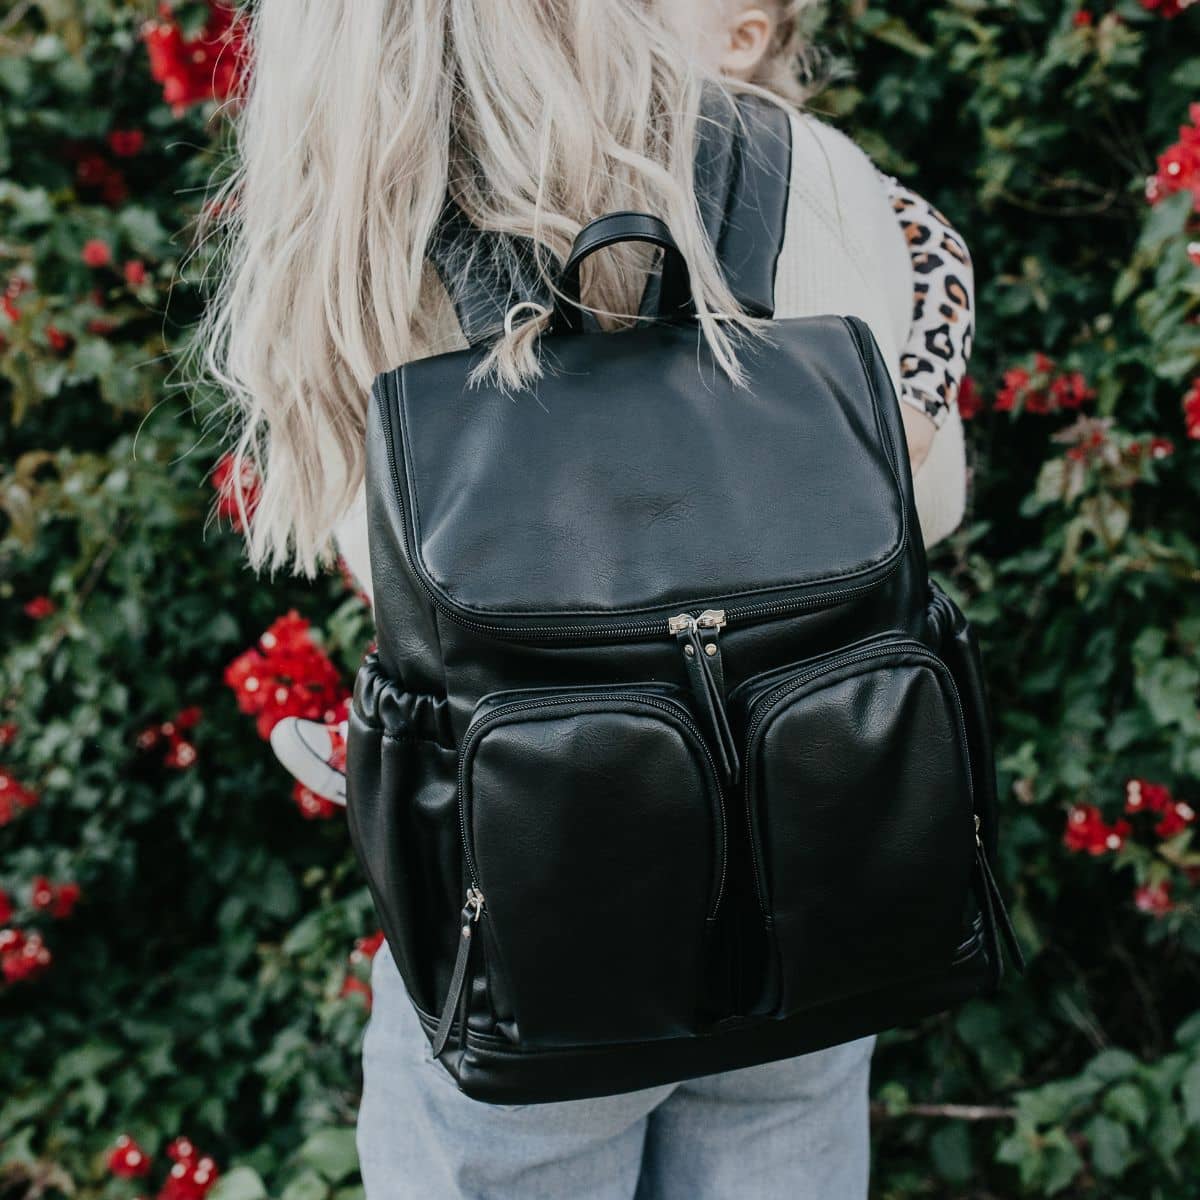 OiOi Faux Leather Nappy Backpack - Black